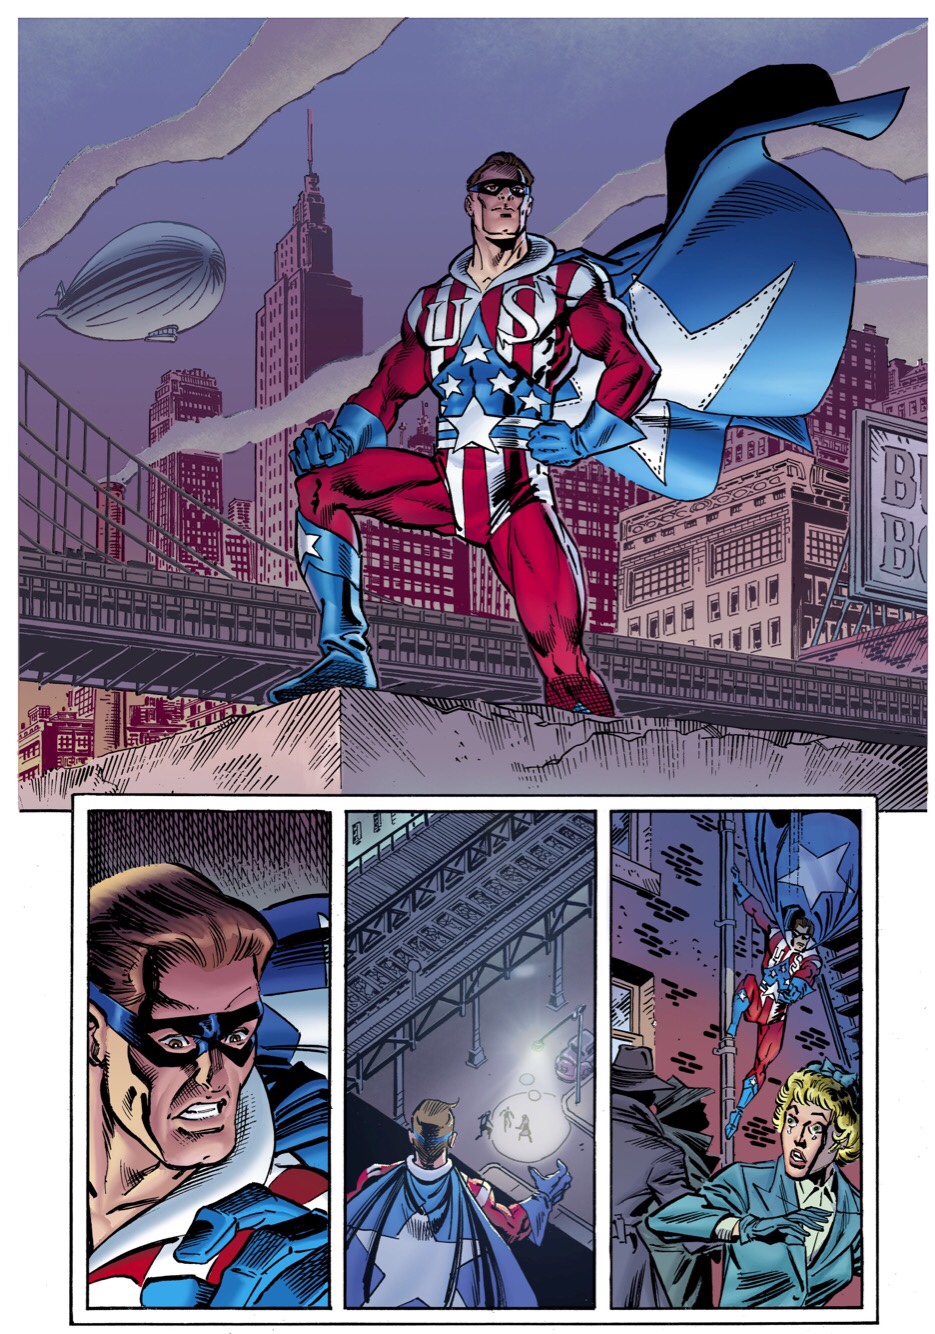 Preview page from "The Liberty Brigade" - art by Ron Frenz and Joe Rubinstein